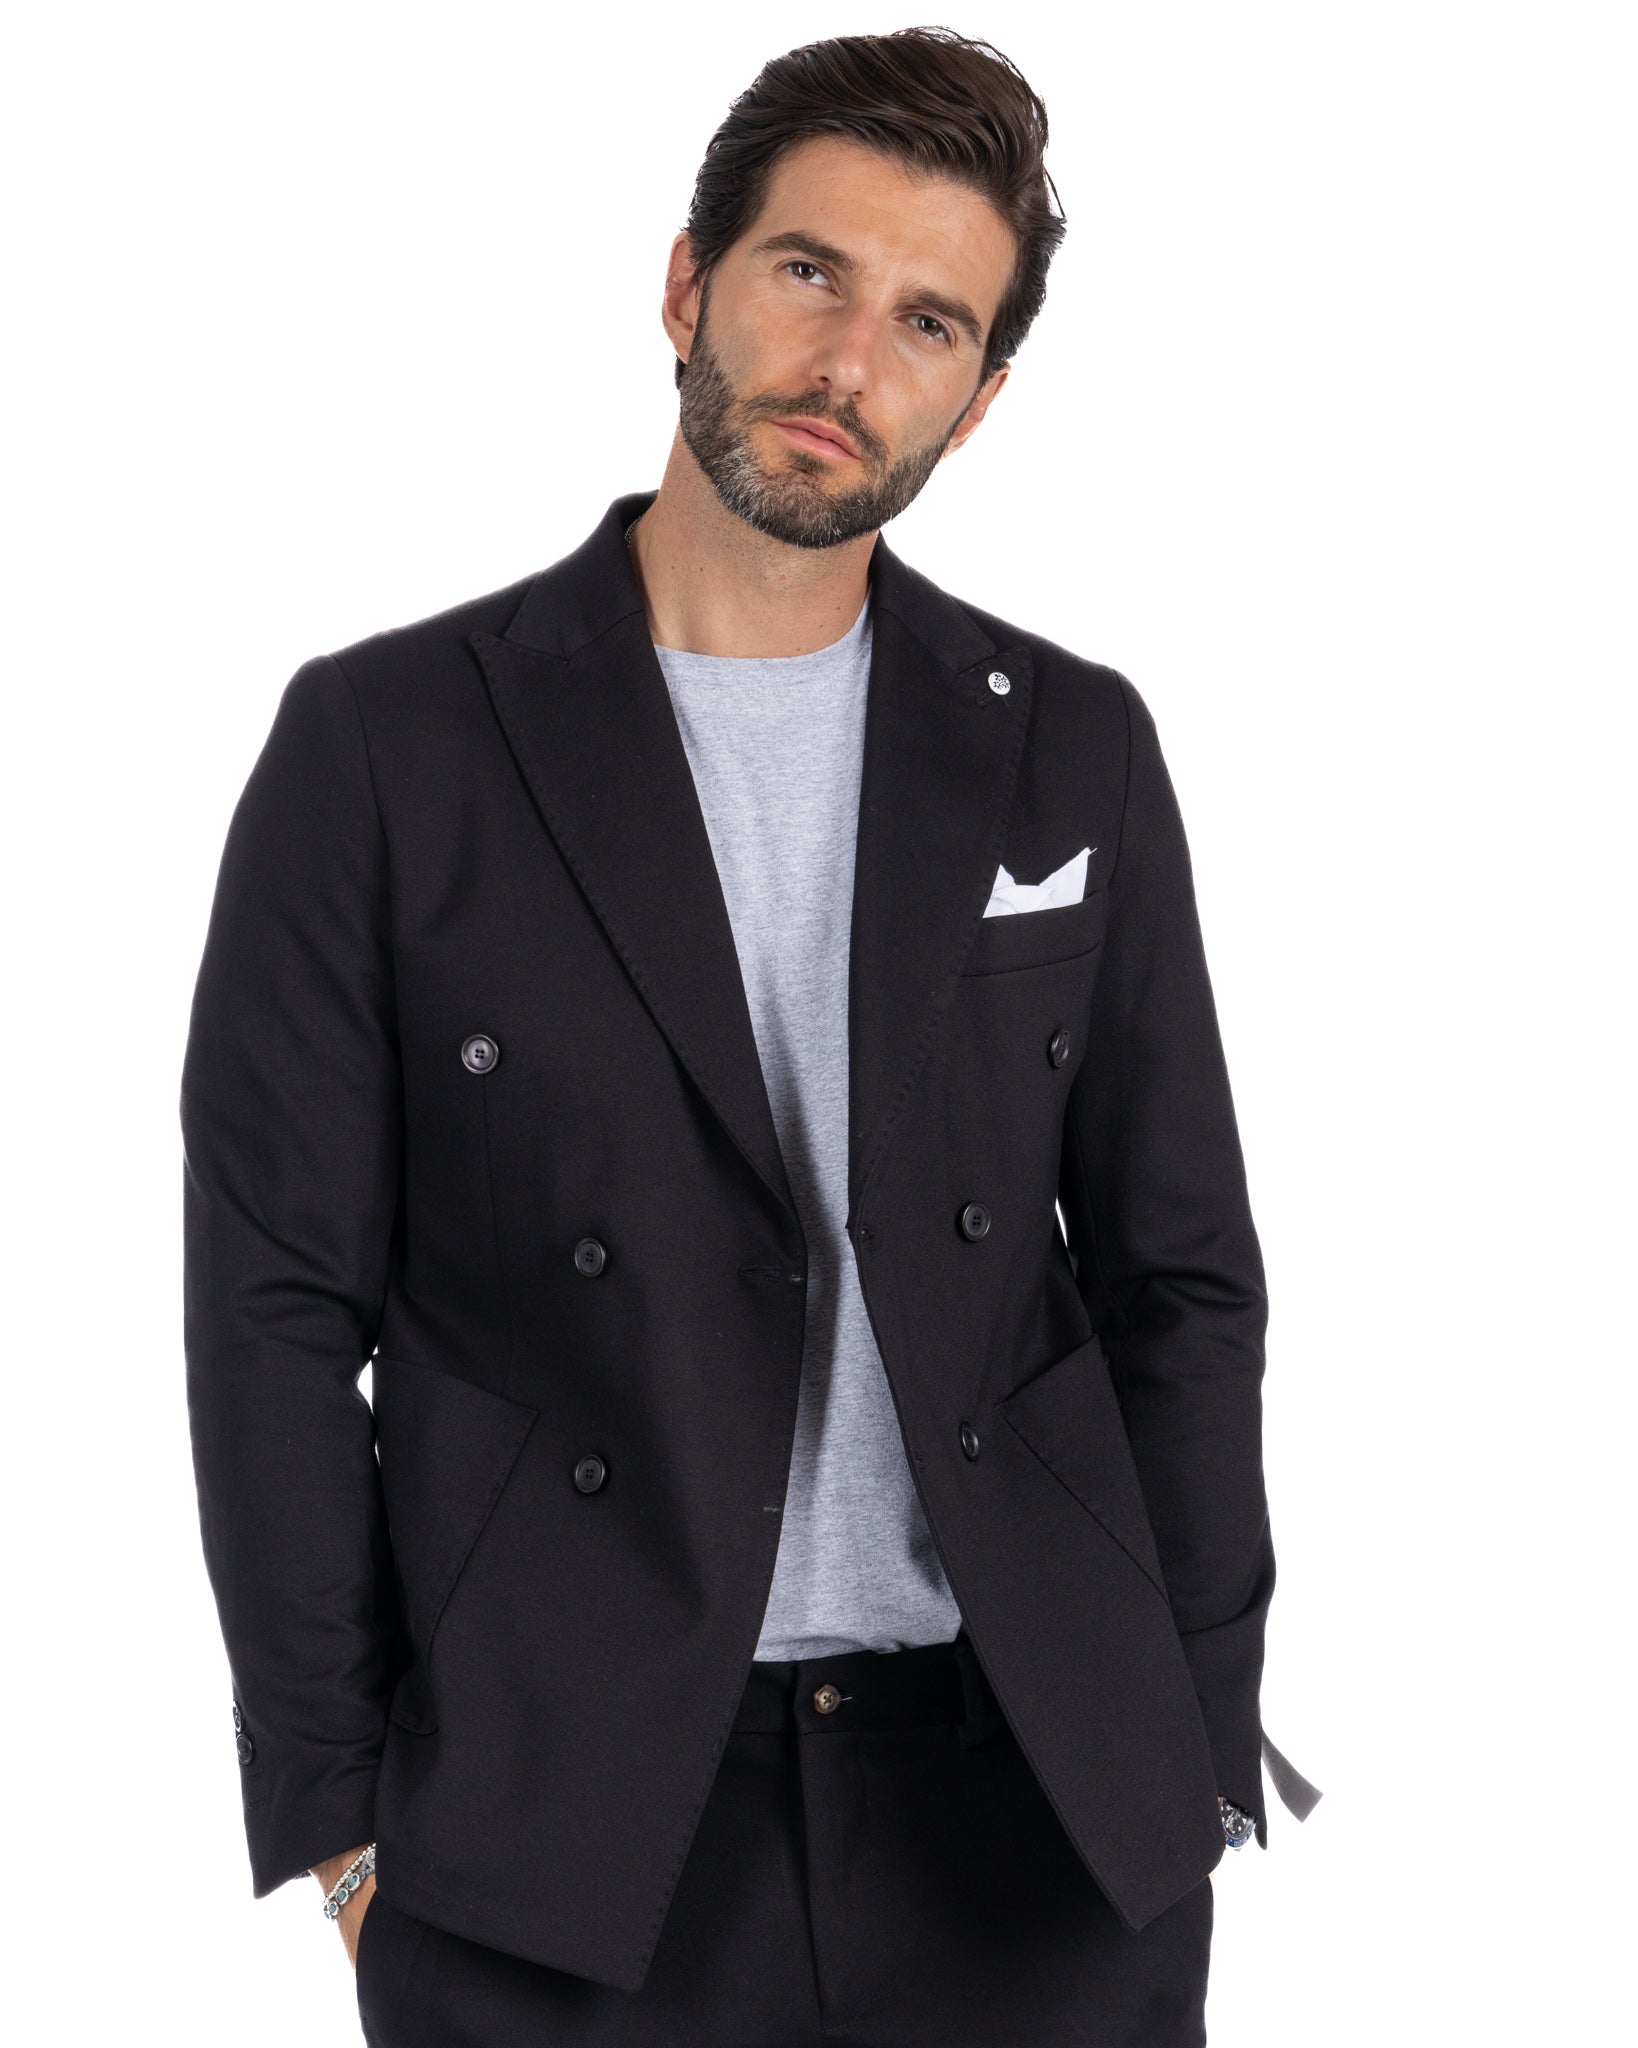 Mustang - black milan stitch double-breasted jacket